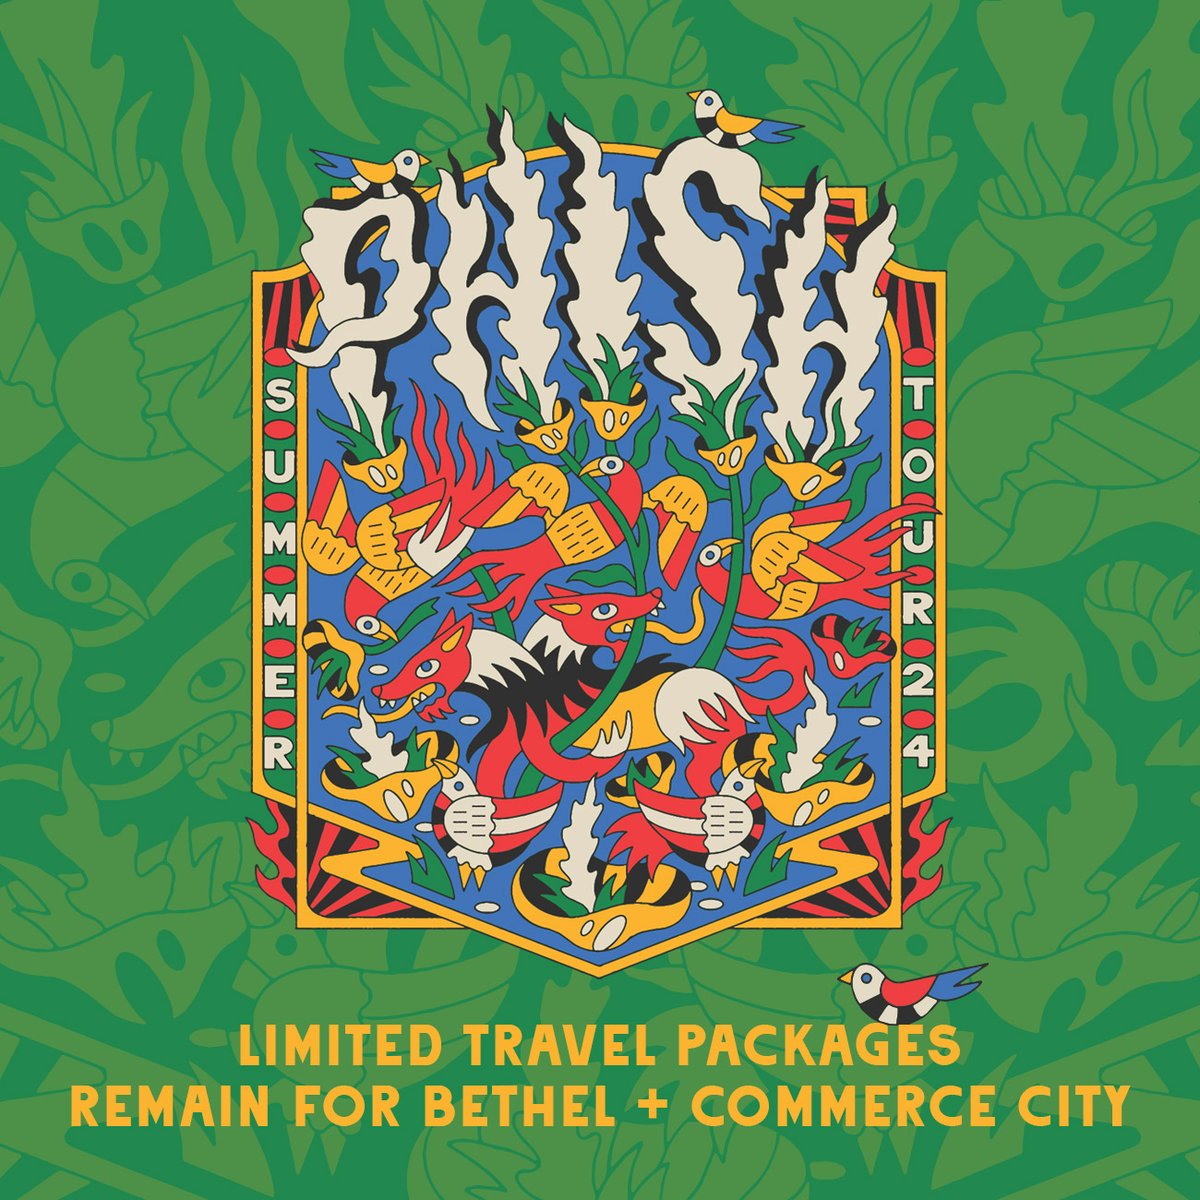 Limited Travel Packages remain for Phish's Summer stops in Bethel + Commerce City. Packages include hotel, tickets, roundtrip transportation between the hotel and venue, and an exclusive commemorative keepsake. Grab yours at: bit.ly/48xQVF4